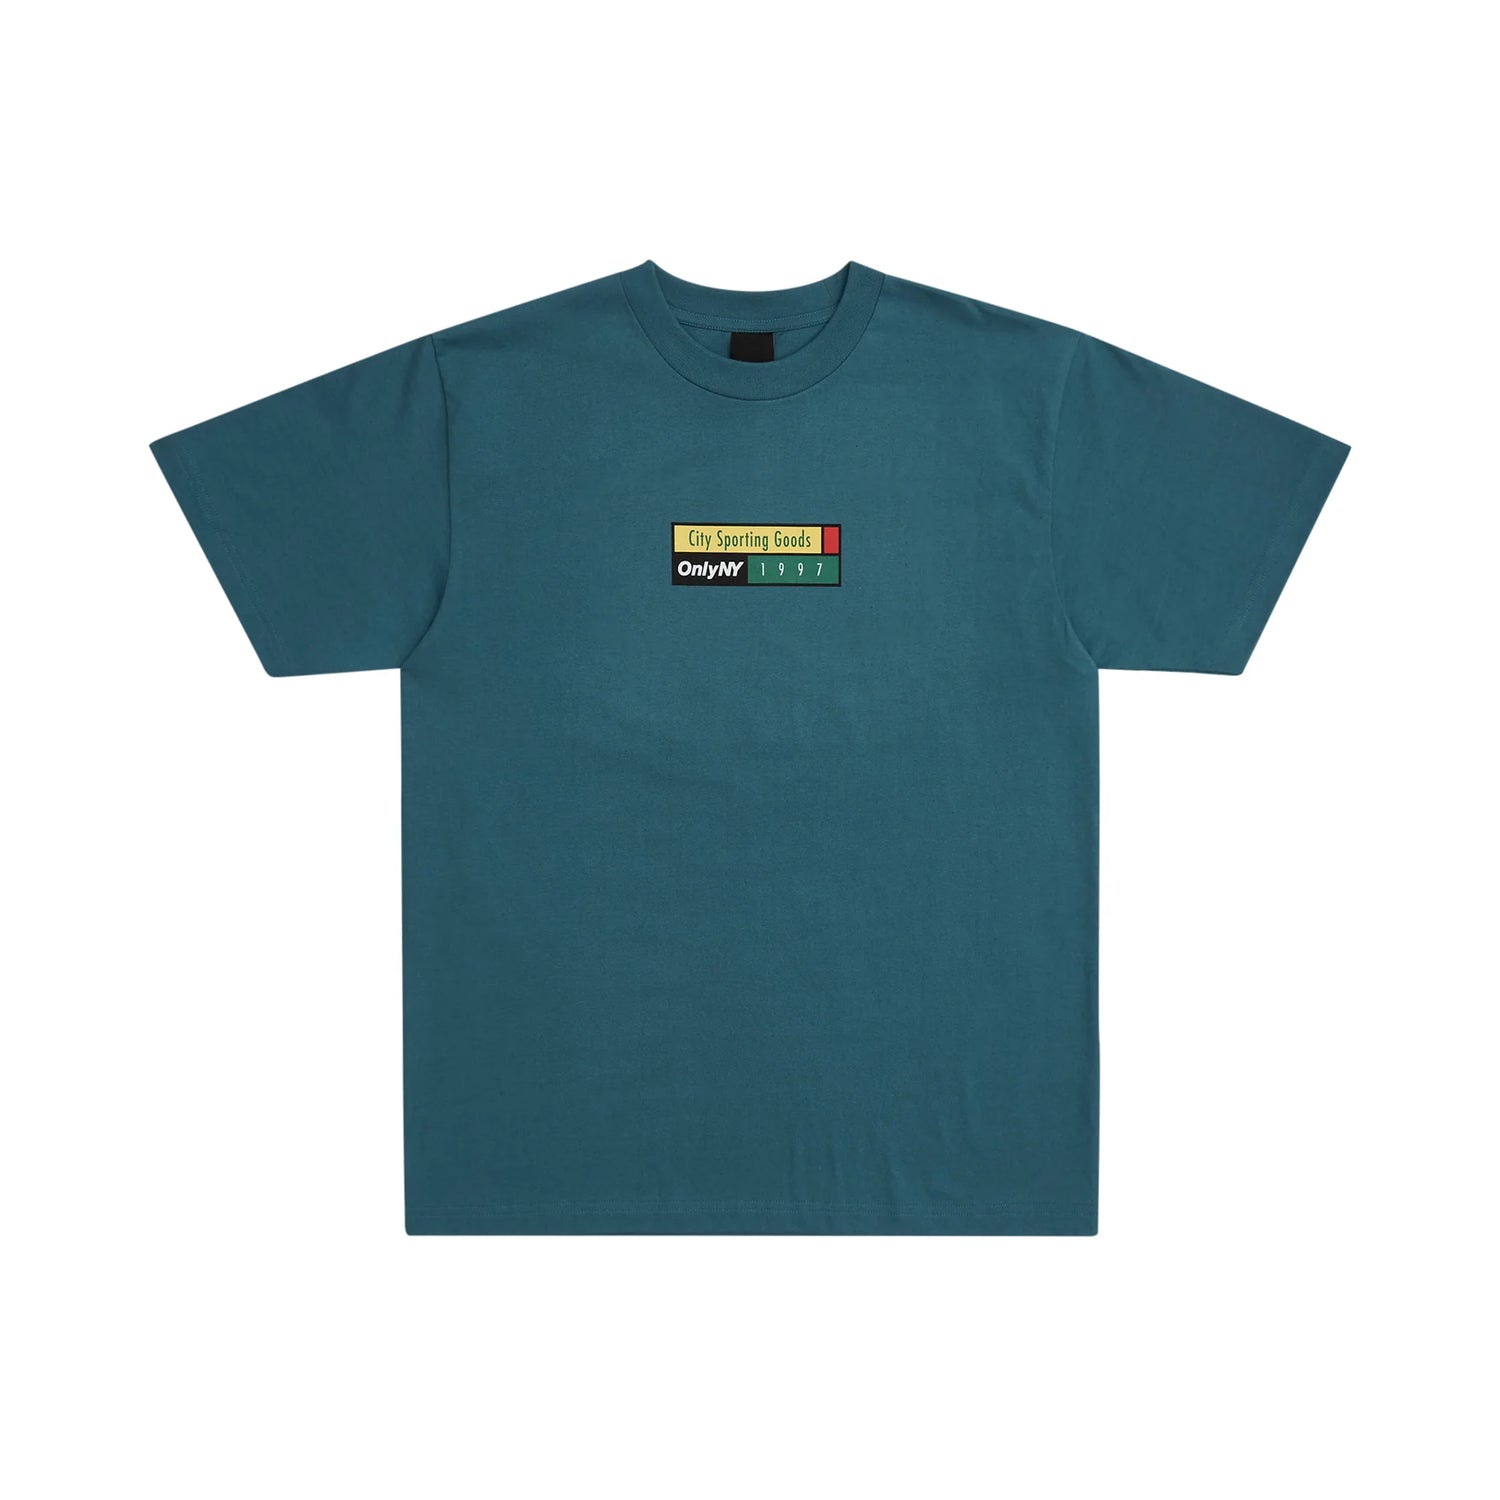 Only NY Sporting Goods T-Shirt - Teal